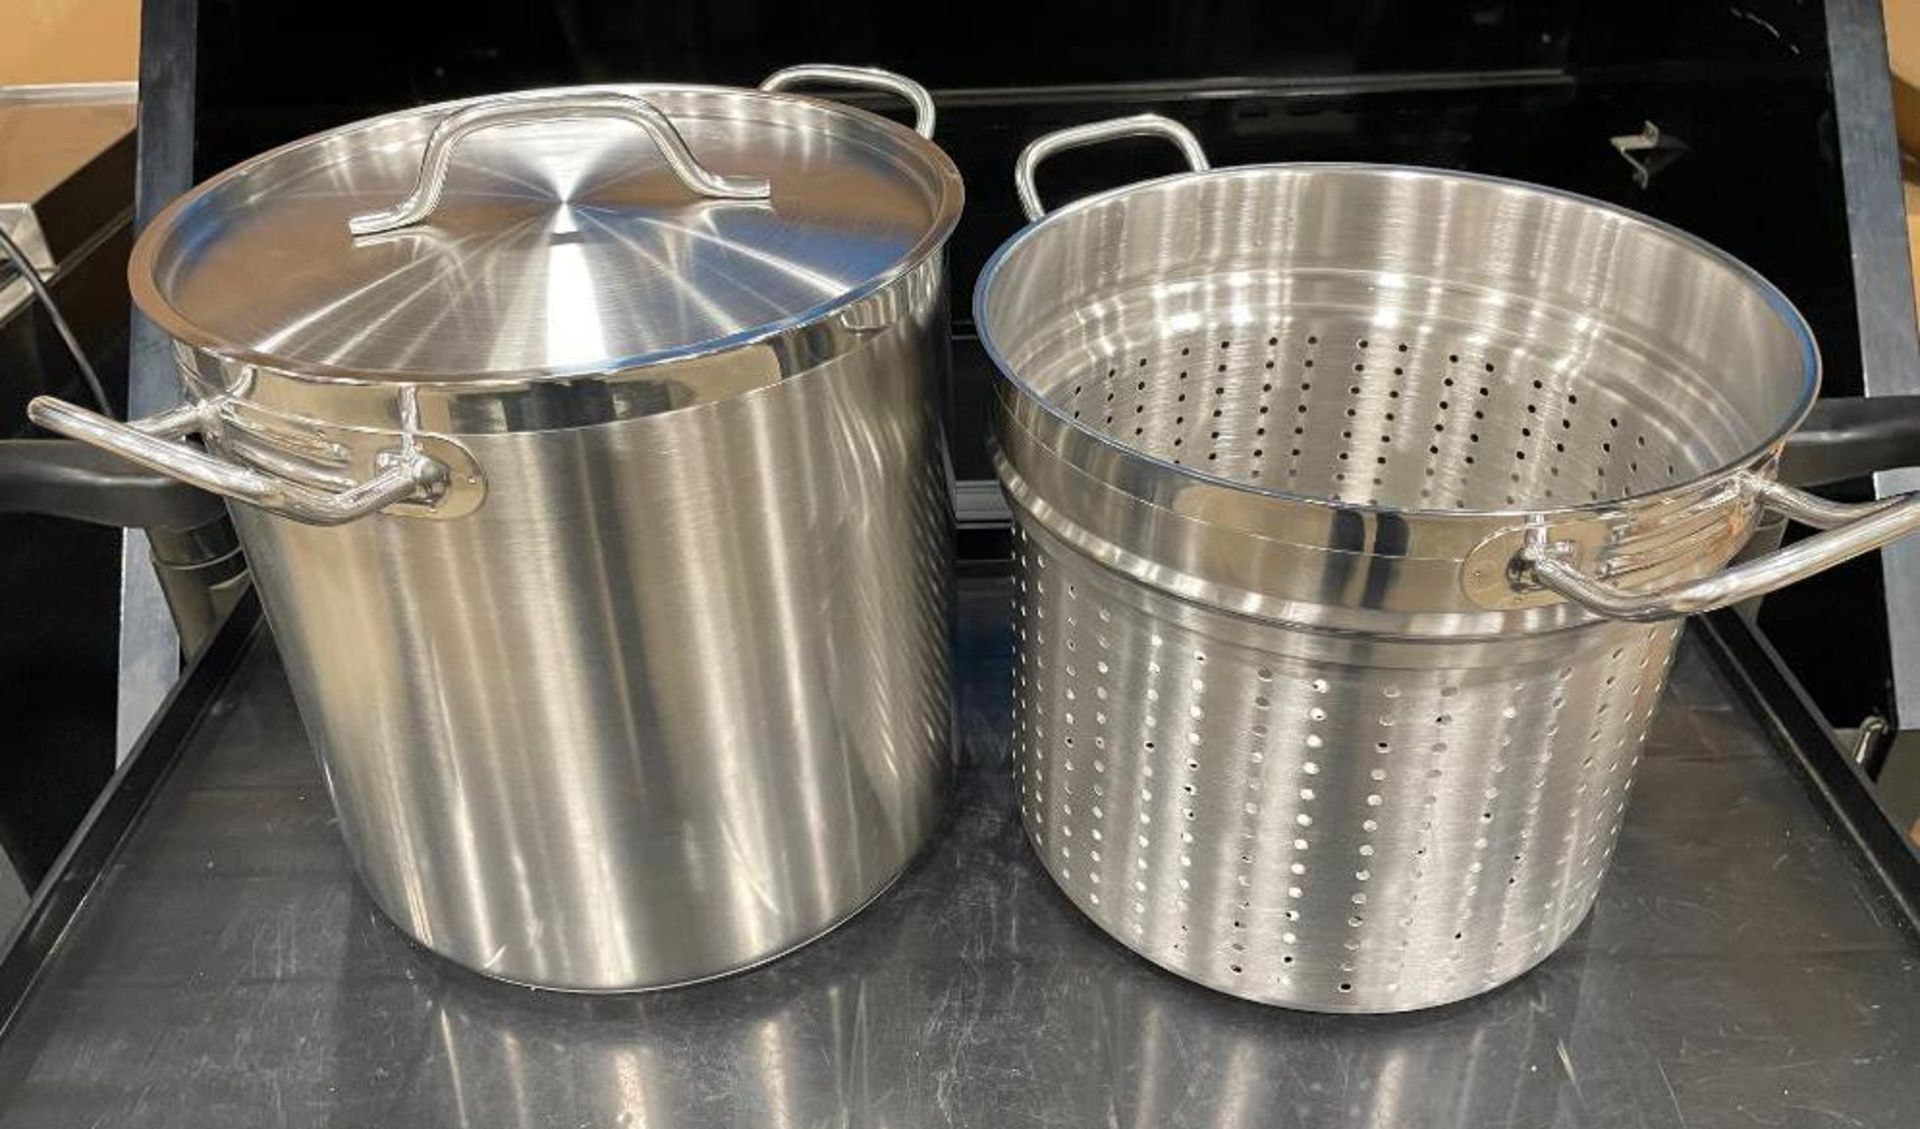 20QT HEAVY DUTY STAINLESS STOCK POT INDUCTION CAPABLE & STEAMER BASKET, JR 47202 & 47204 - NEW - Image 5 of 6